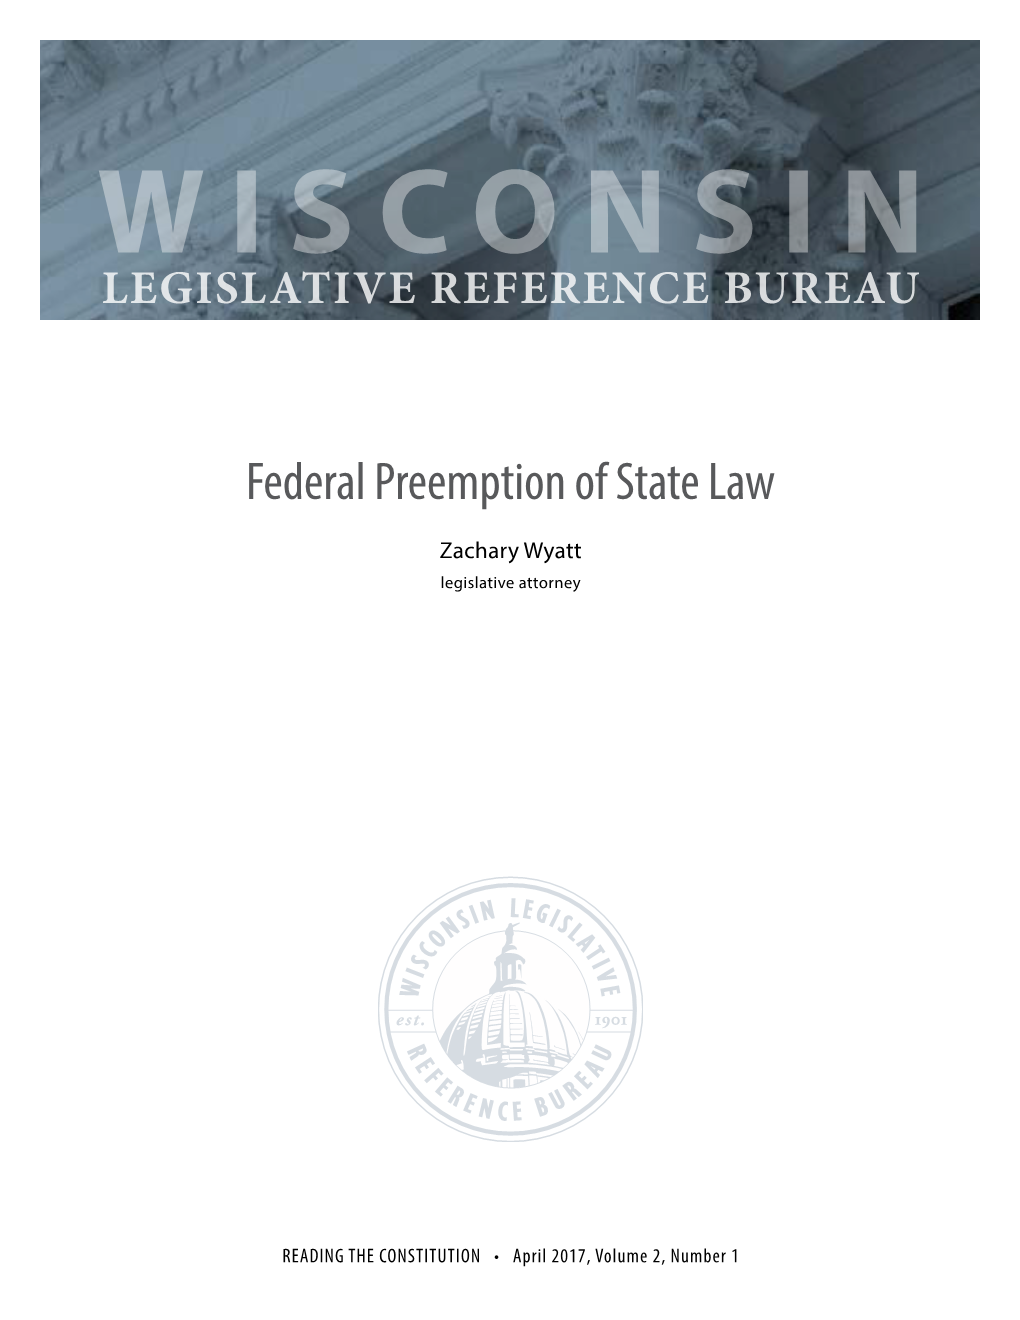 Federal Preemption of State Law